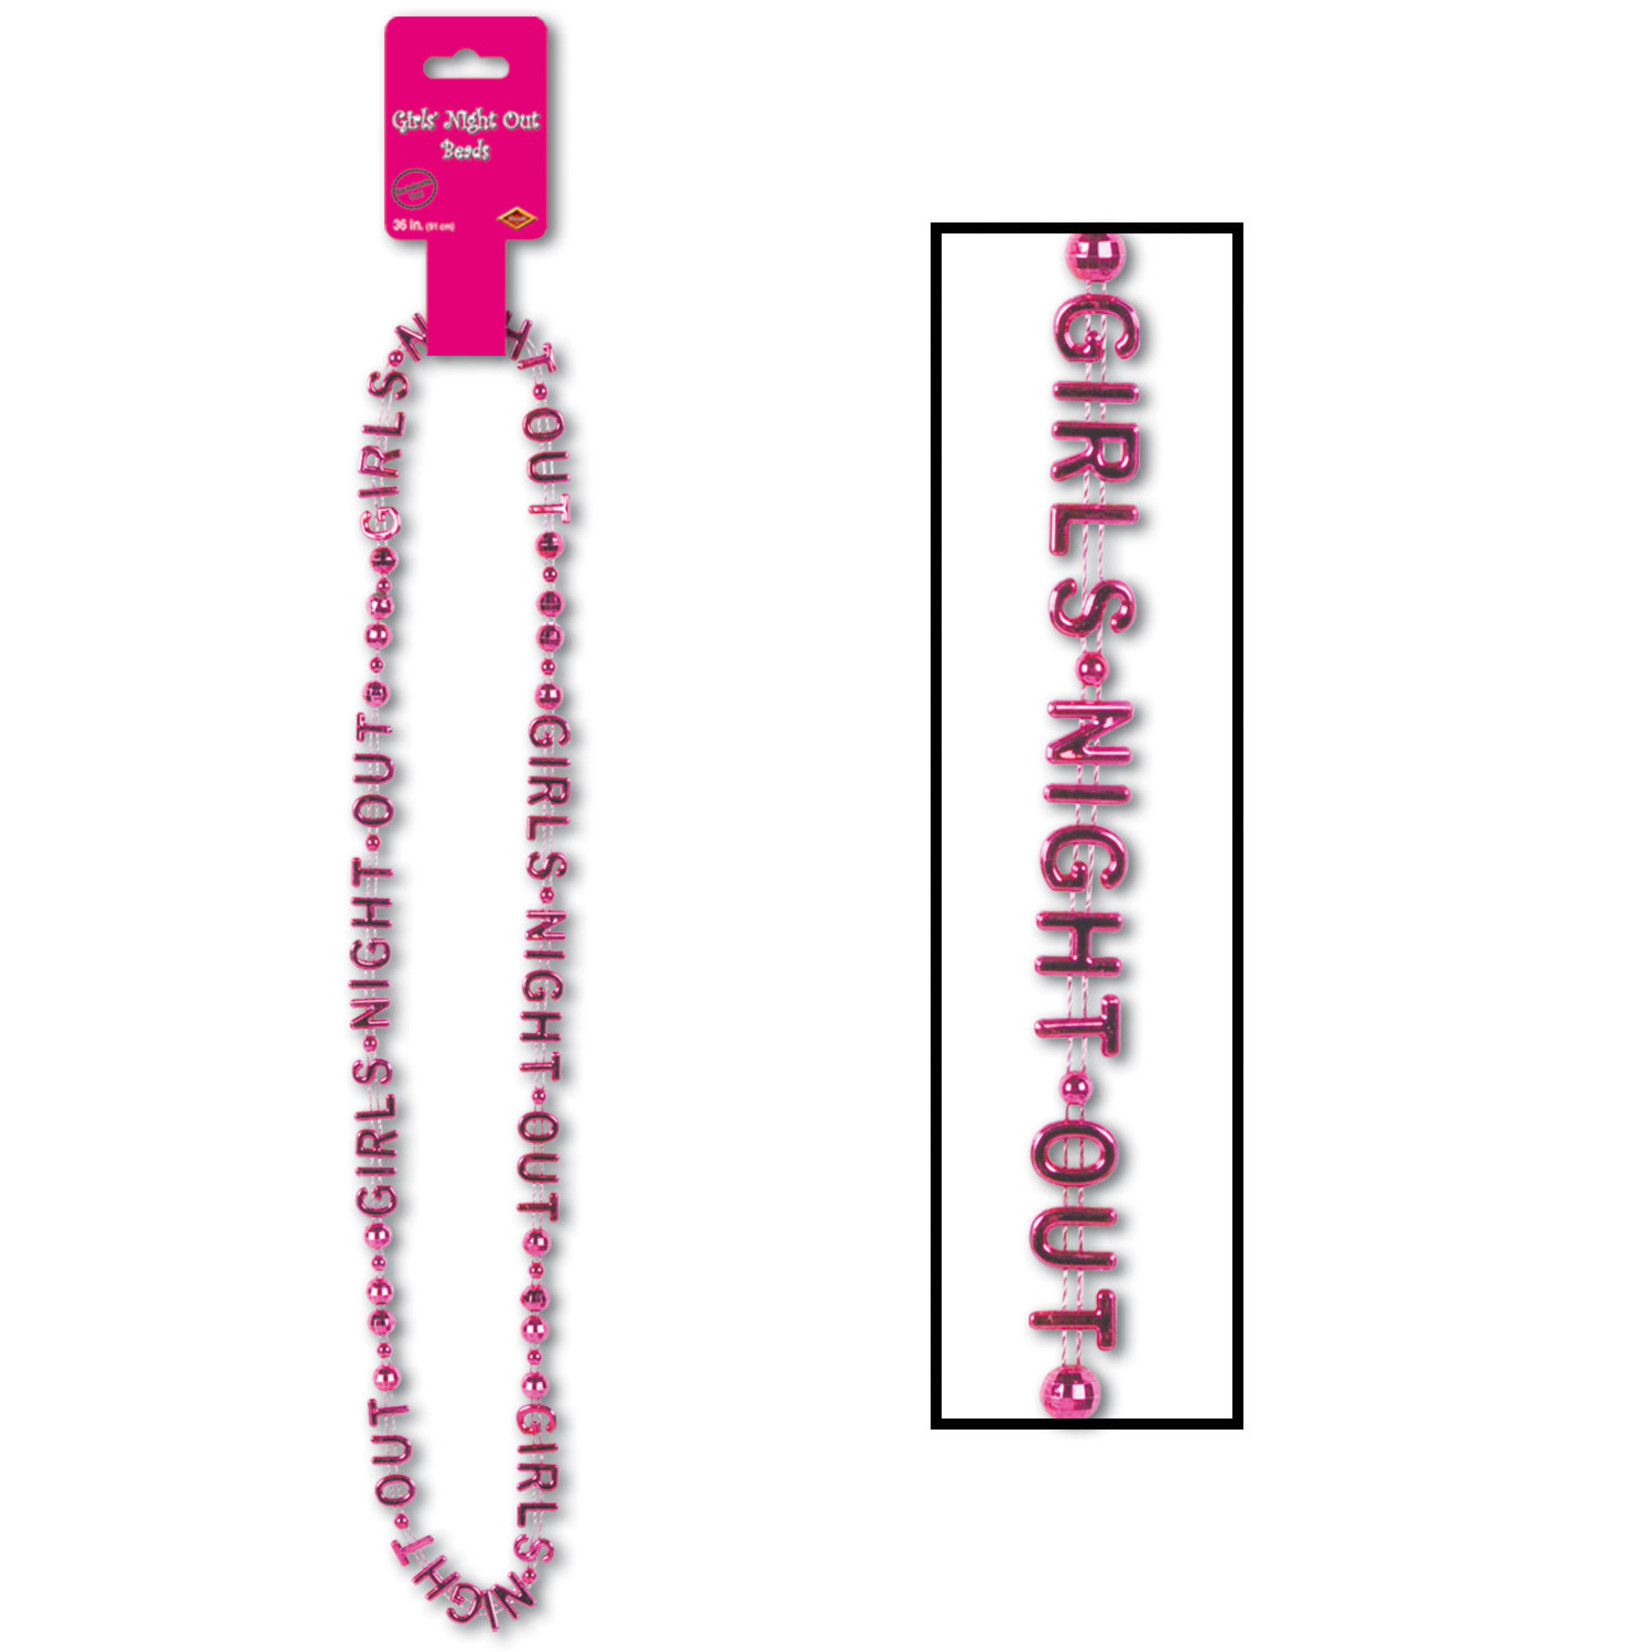 Beistle Bachelorette "Girls' Night Out" Hot Pink Beads - 1ct.